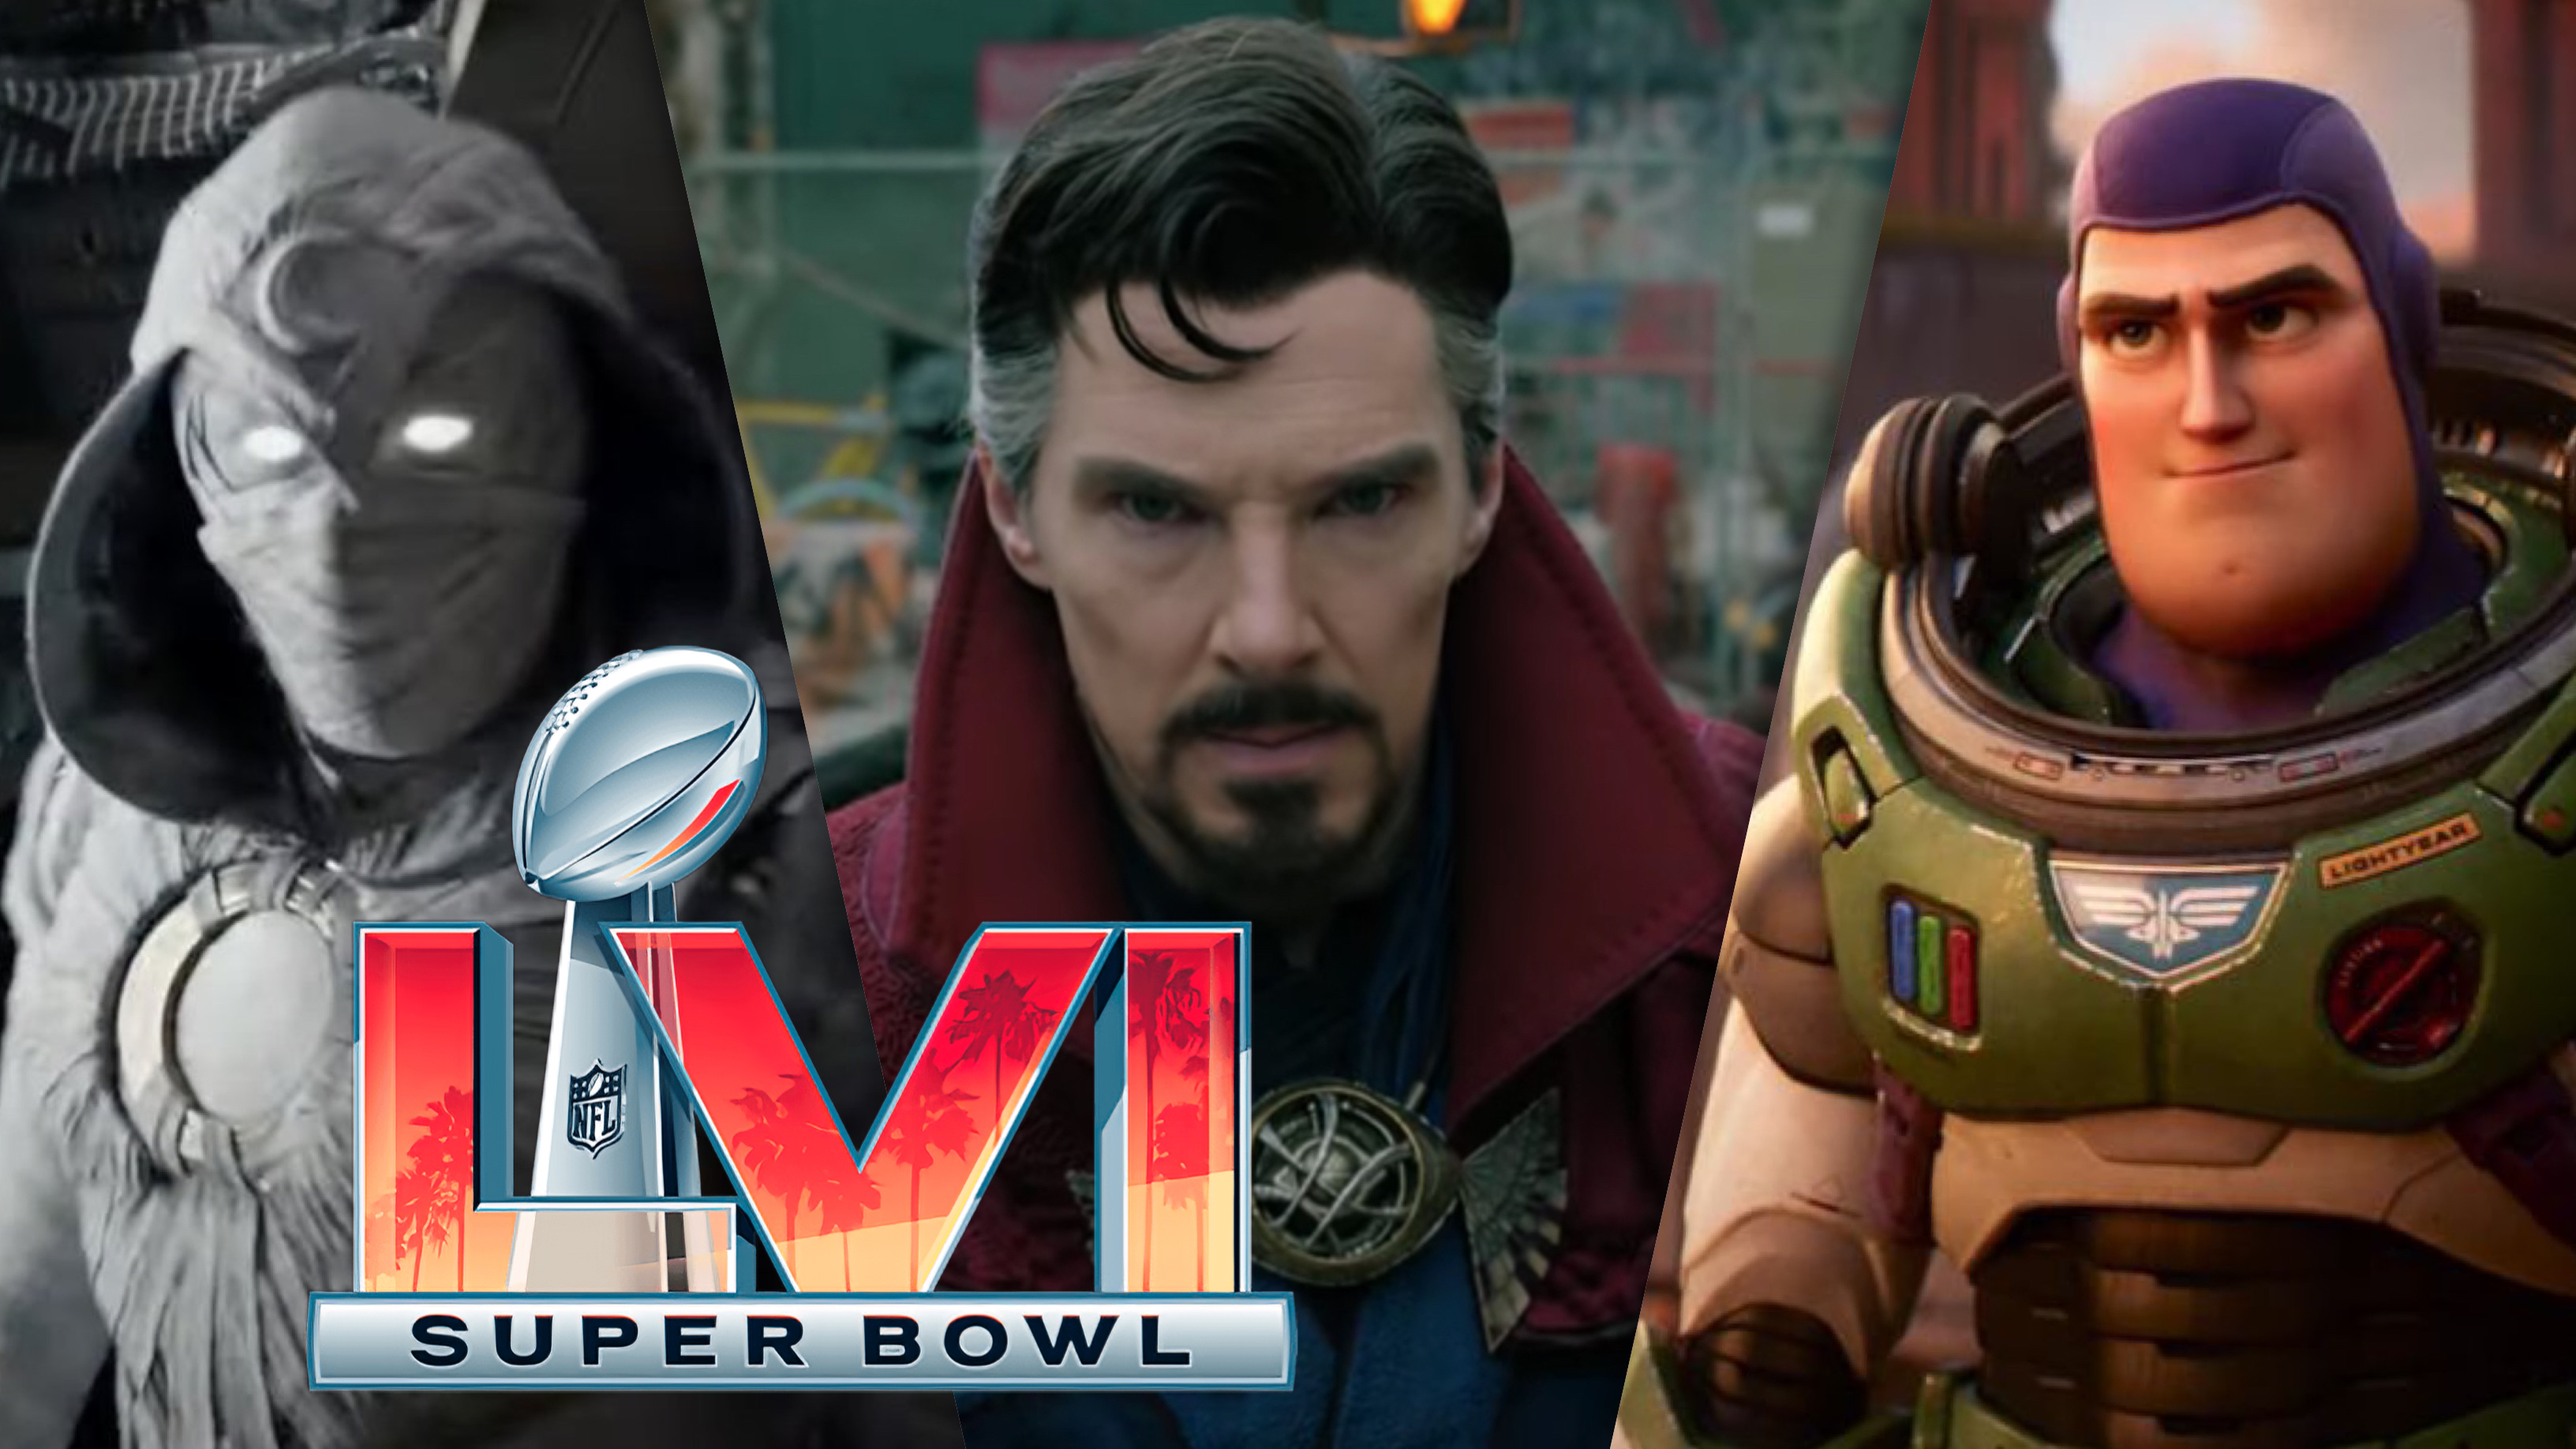 What Teasers Does Disney Have in Store For The Super Bowl?